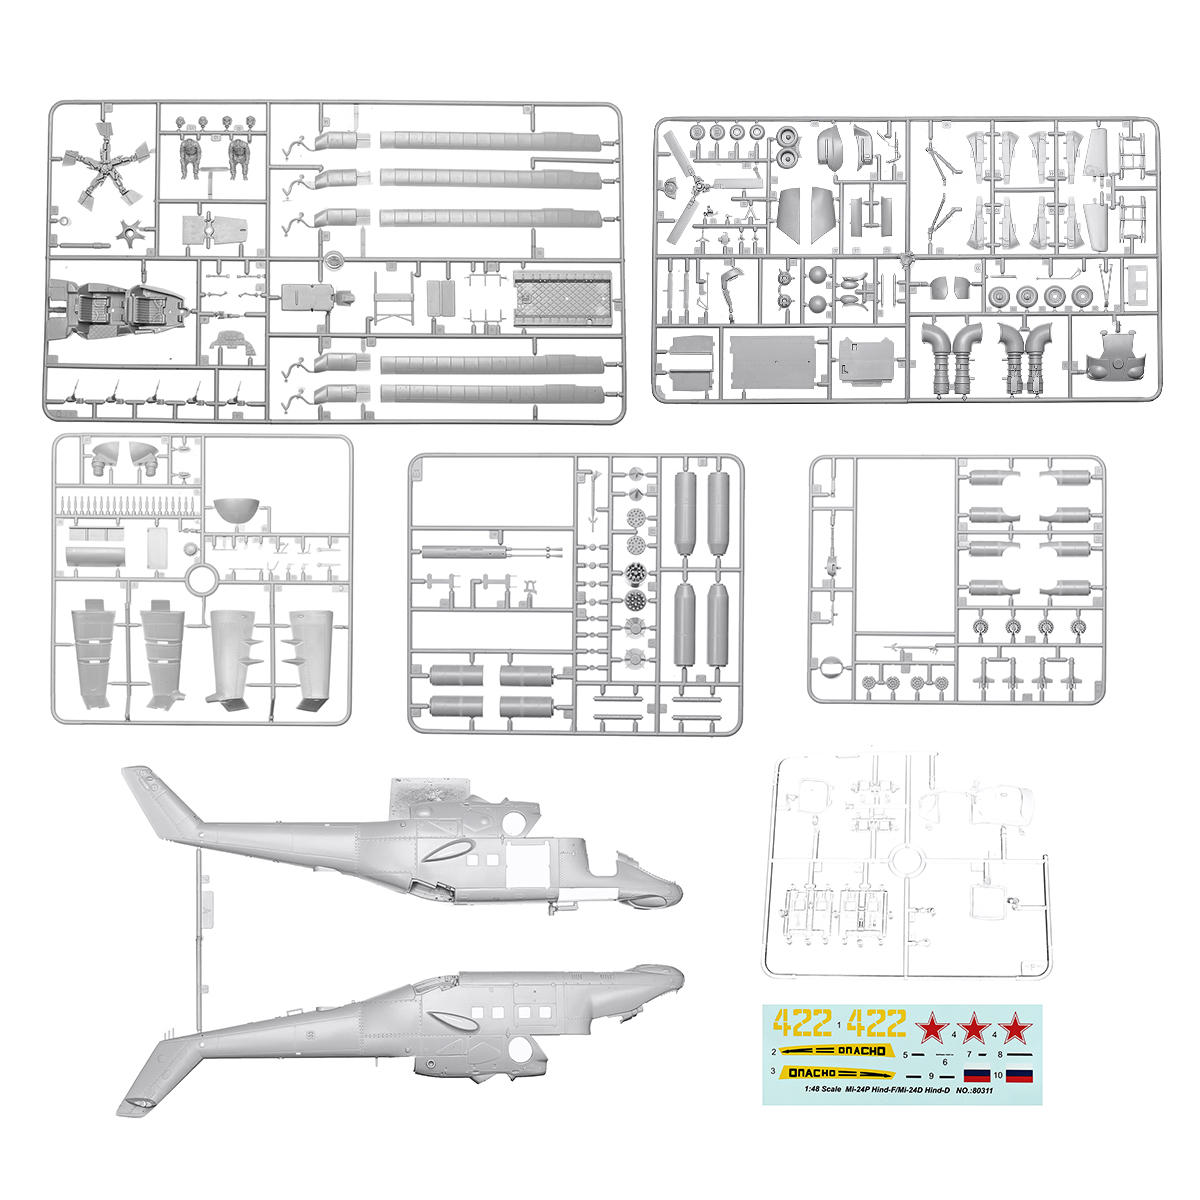 Mi-24P Hind-F/Mi-24D Hind-D 1:48 Scale Static Aircraft Series Helicopter Model Toys